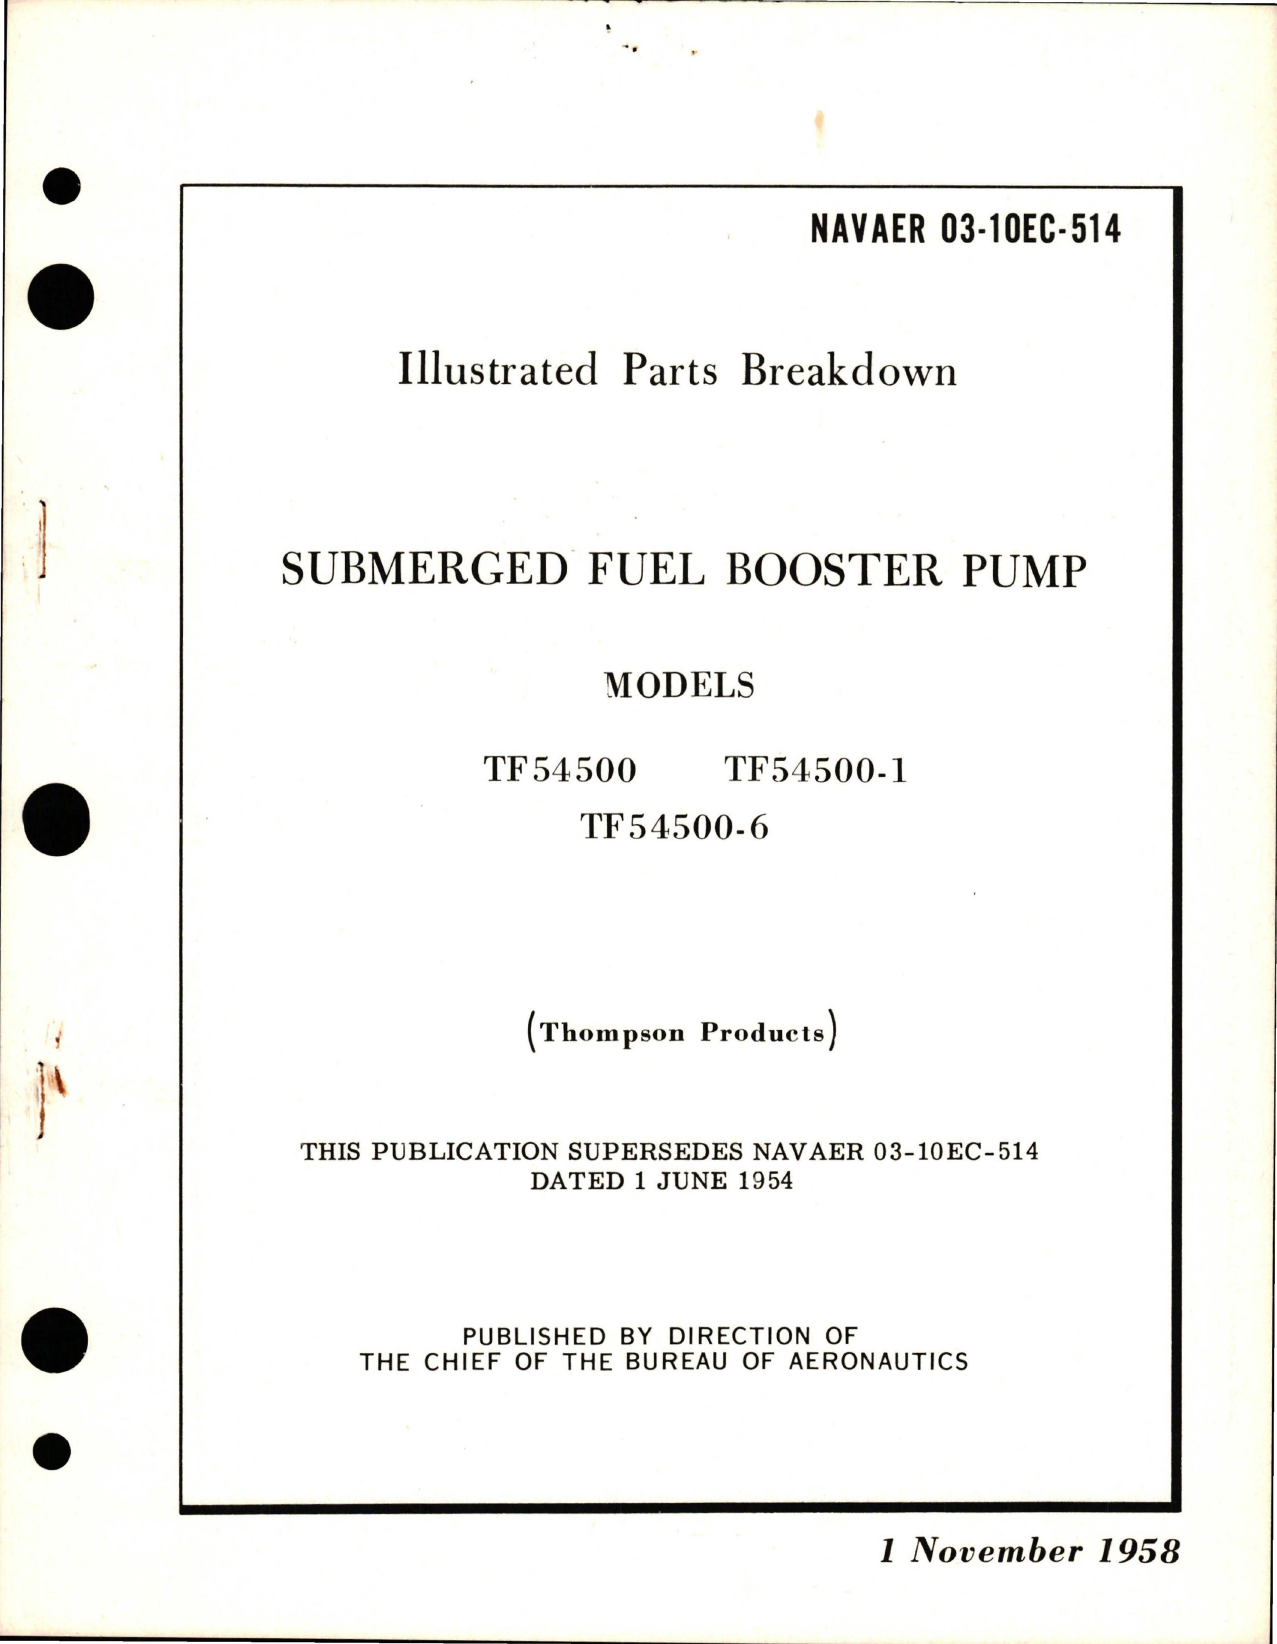 Sample page 1 from AirCorps Library document: Illustrated Parts Breakdown for Submerged Fuel Booster Pump - Models TF54500, TF54500-1, and TF54500-6